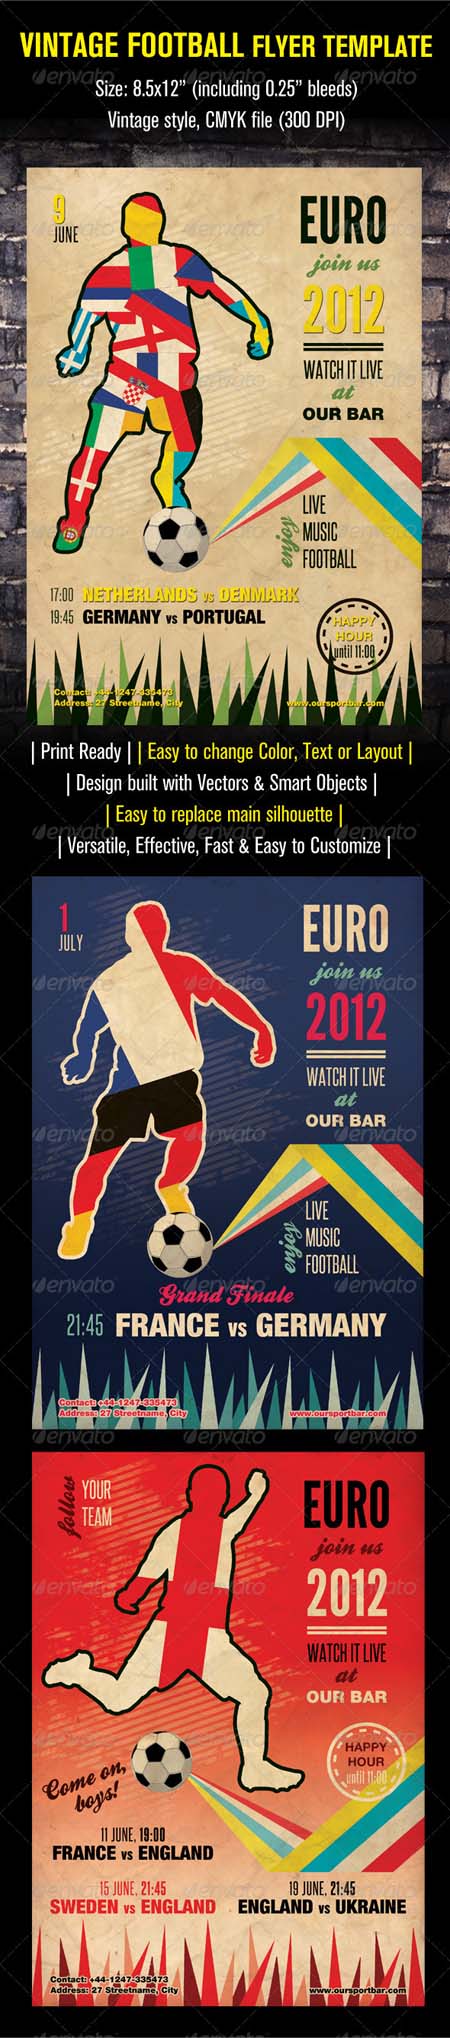 GraphicRiver Vintage Football Flyer Template Photoshop